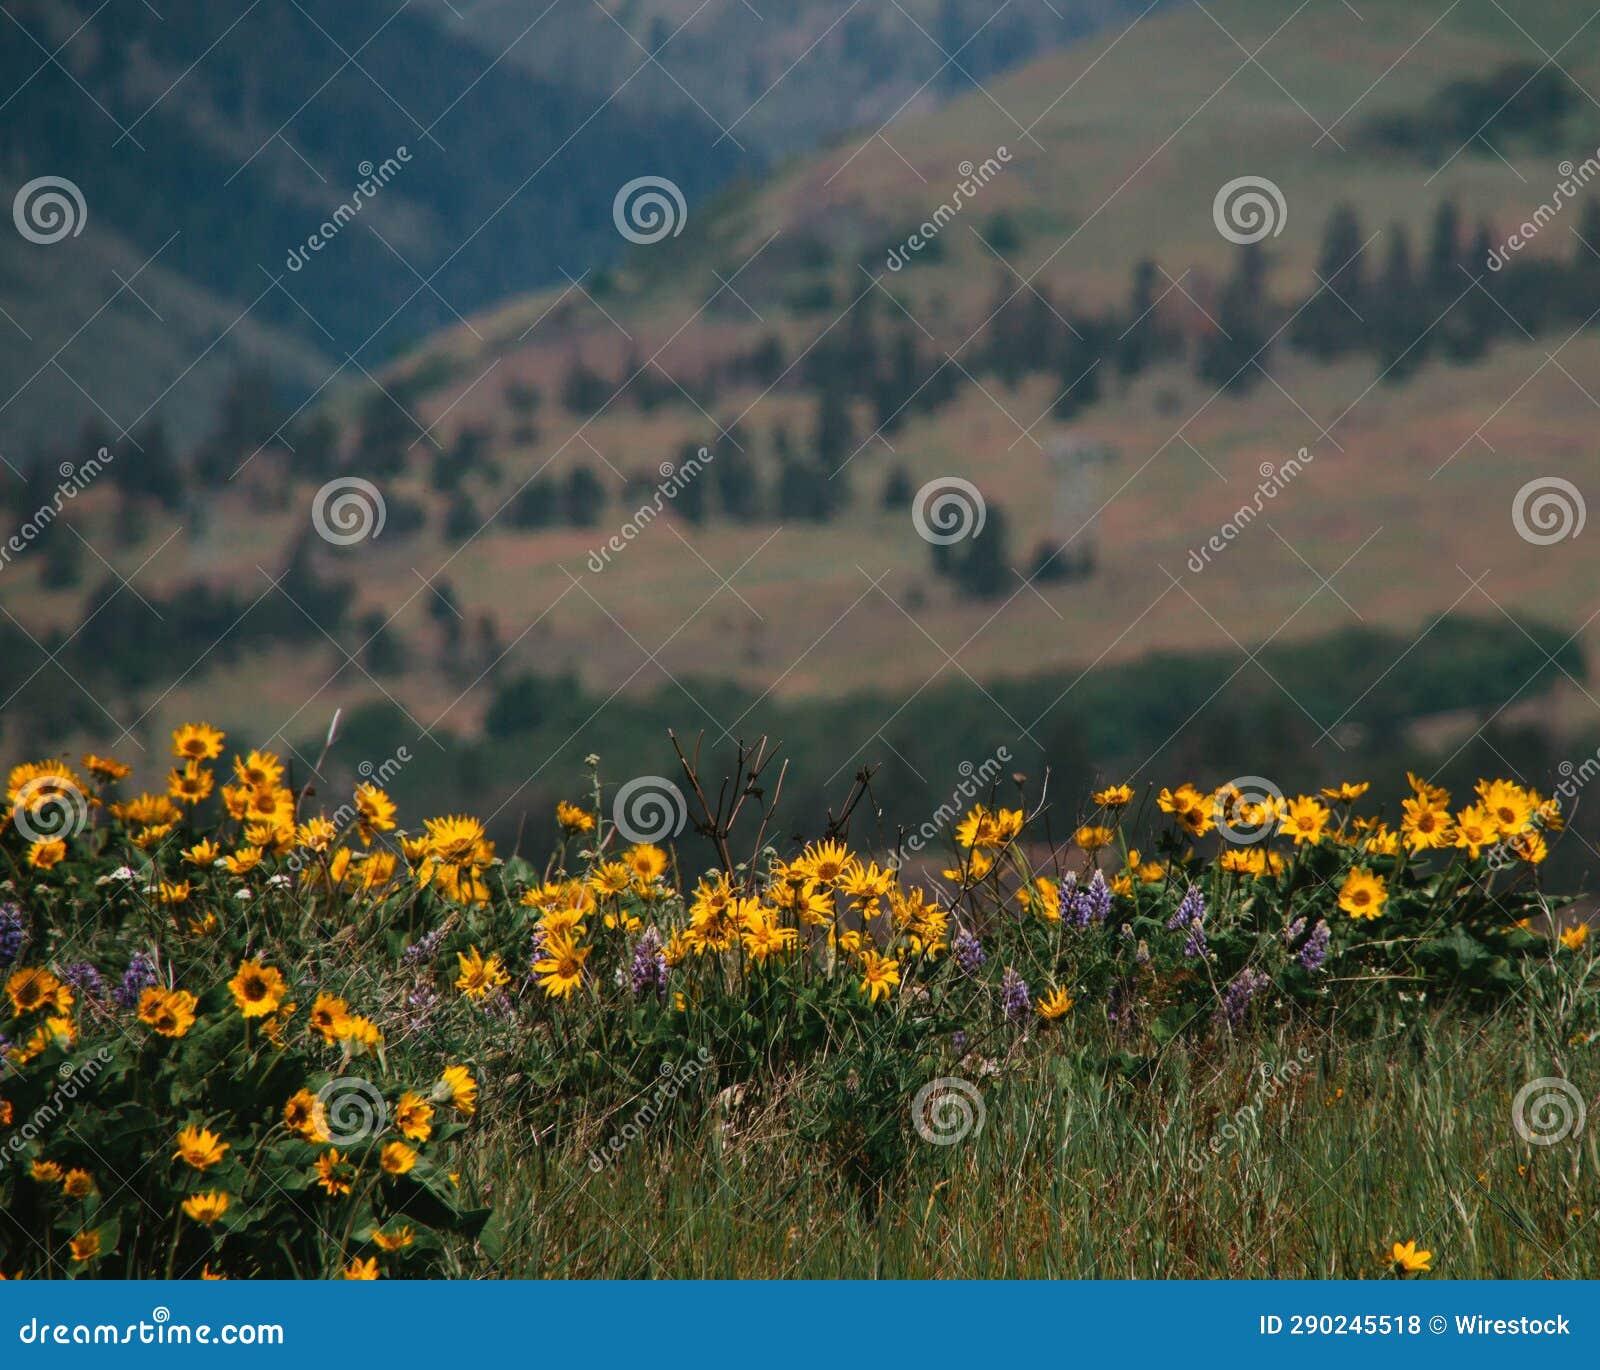 vibrant, sunny image of a field of blooming balsamoriza sagitta flowers